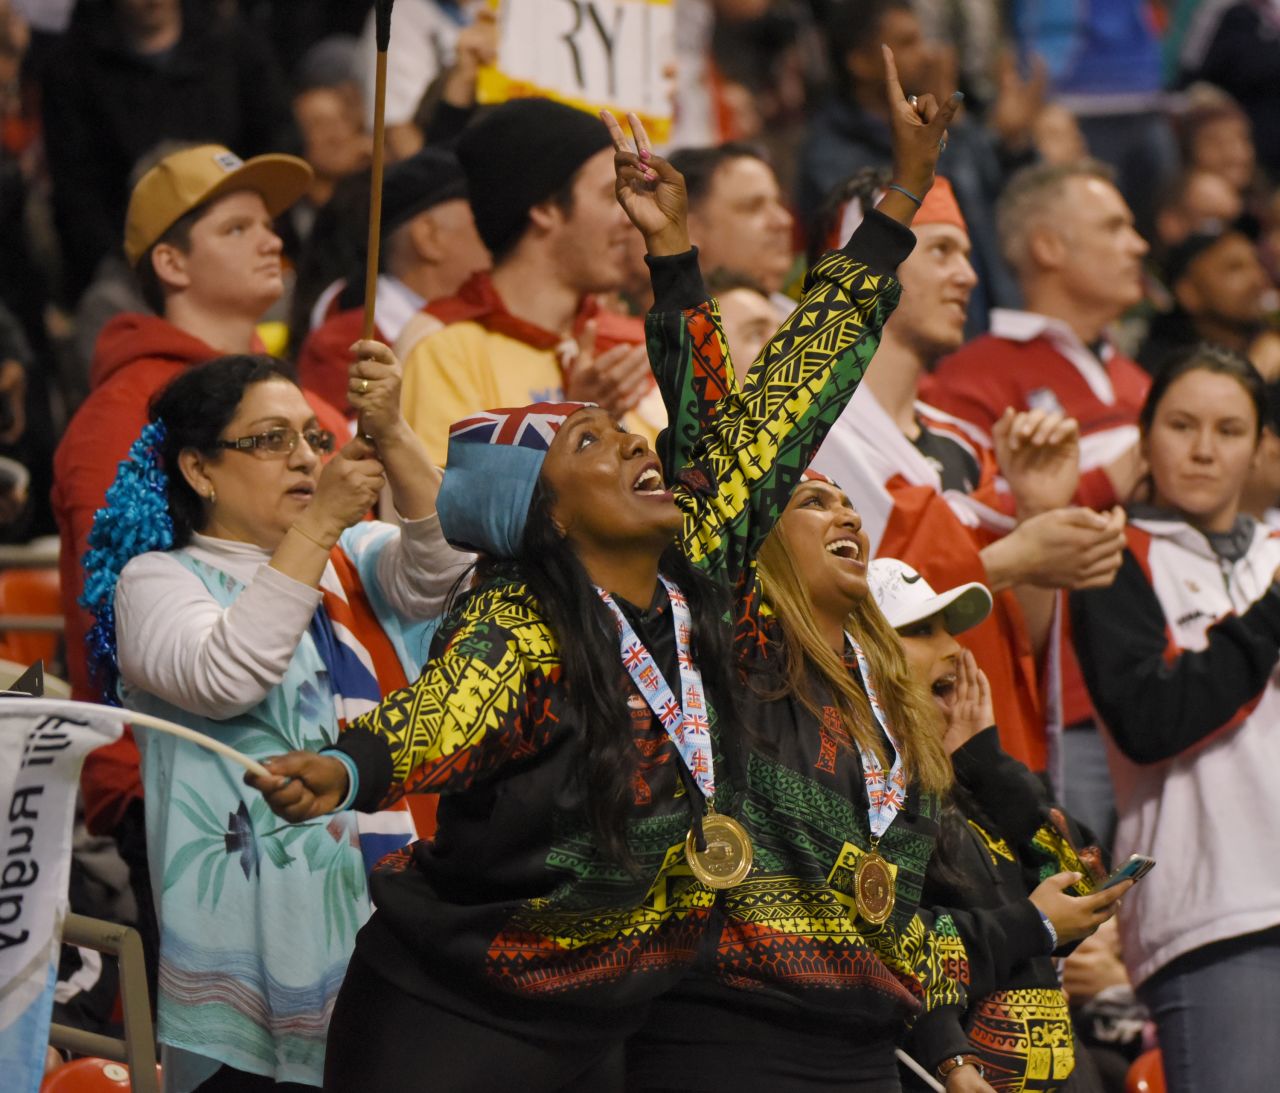 The rugby sevens world series has a reputation for attracting vibrant crowds, and Vancouver was no exception. The hosts estimated <a href="http://www.canadasevens.com/press-release/record-crowd-set-for-2017/" target="_blank" target="_blank">76,000</a> would attend over the weekend, a 26% increase on last year.